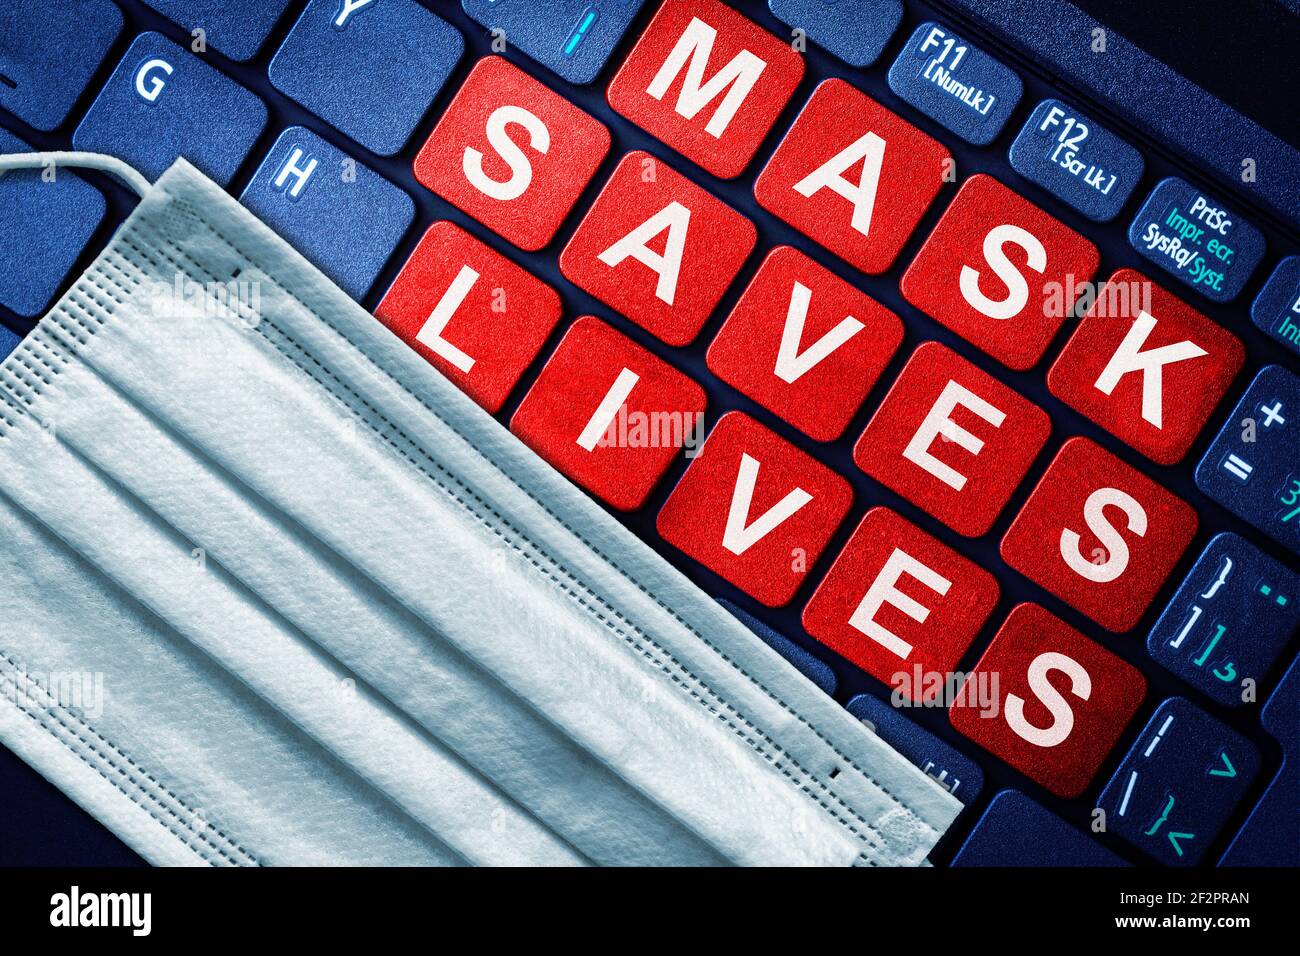 Wearing face mask saves lives concept in the new normal during COVID-19 pandemic outbreak, shown with medical mask on keyboard with red keys highlight Stock Photo